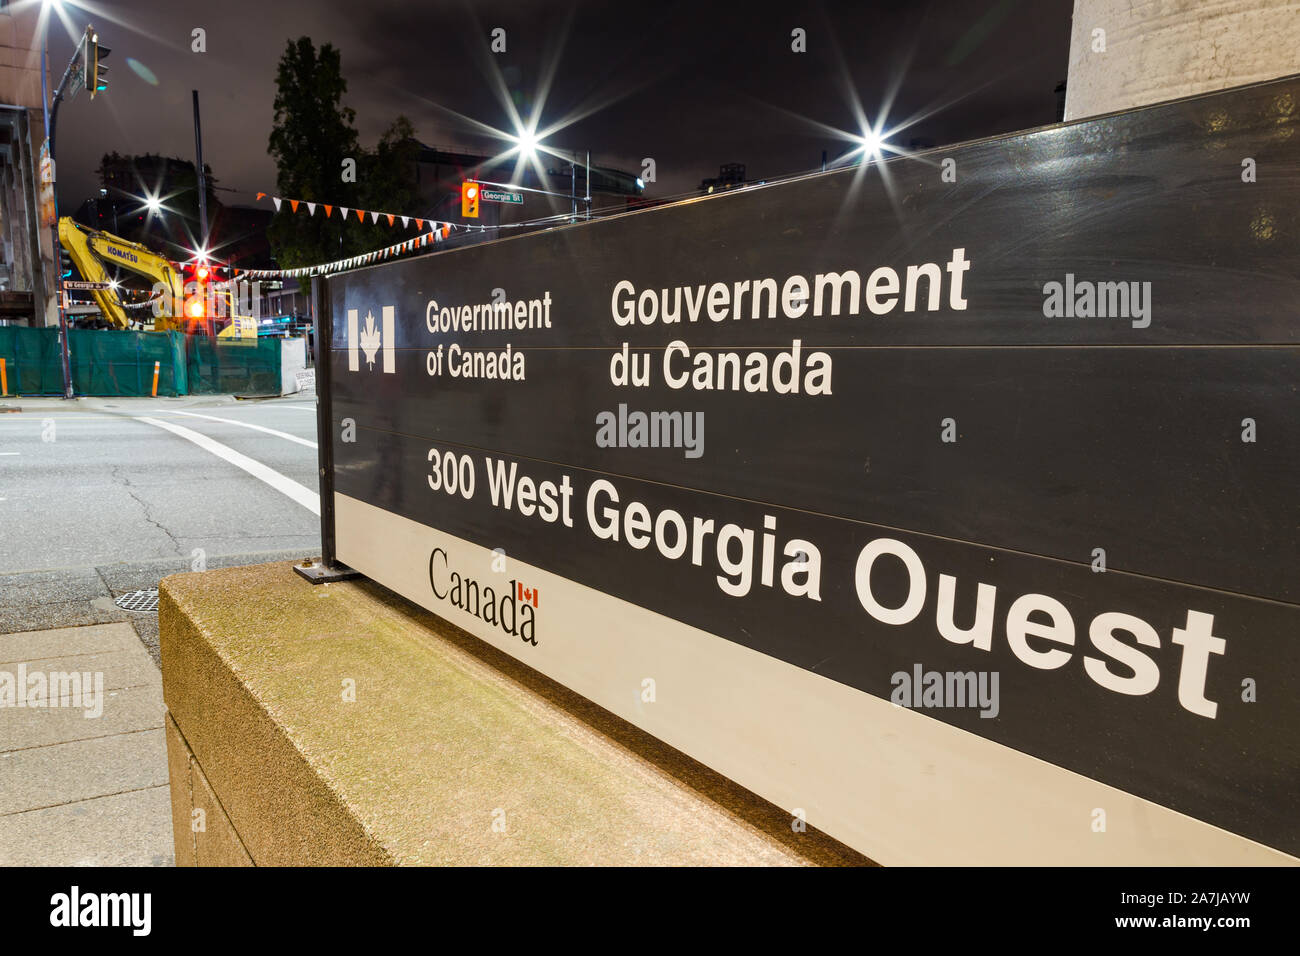 VANCOUVER, BC, CANADA - OCT 05, 2019: Government of Canada building on West Georgia street in downtown Vancouver. Stock Photo